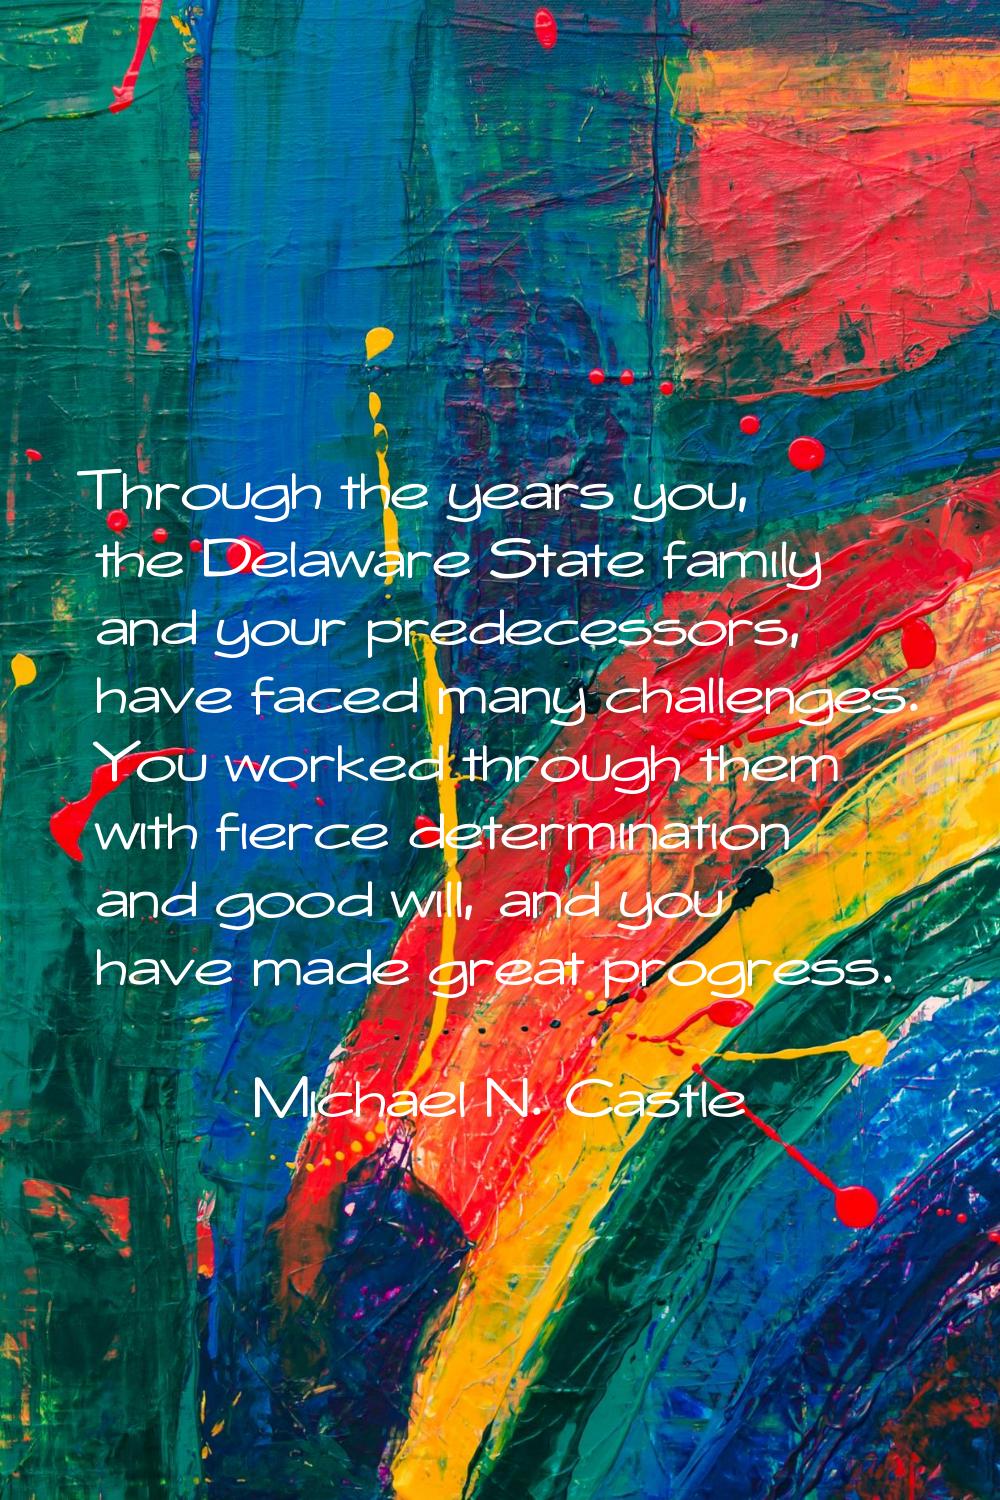 Through the years you, the Delaware State family and your predecessors, have faced many challenges.